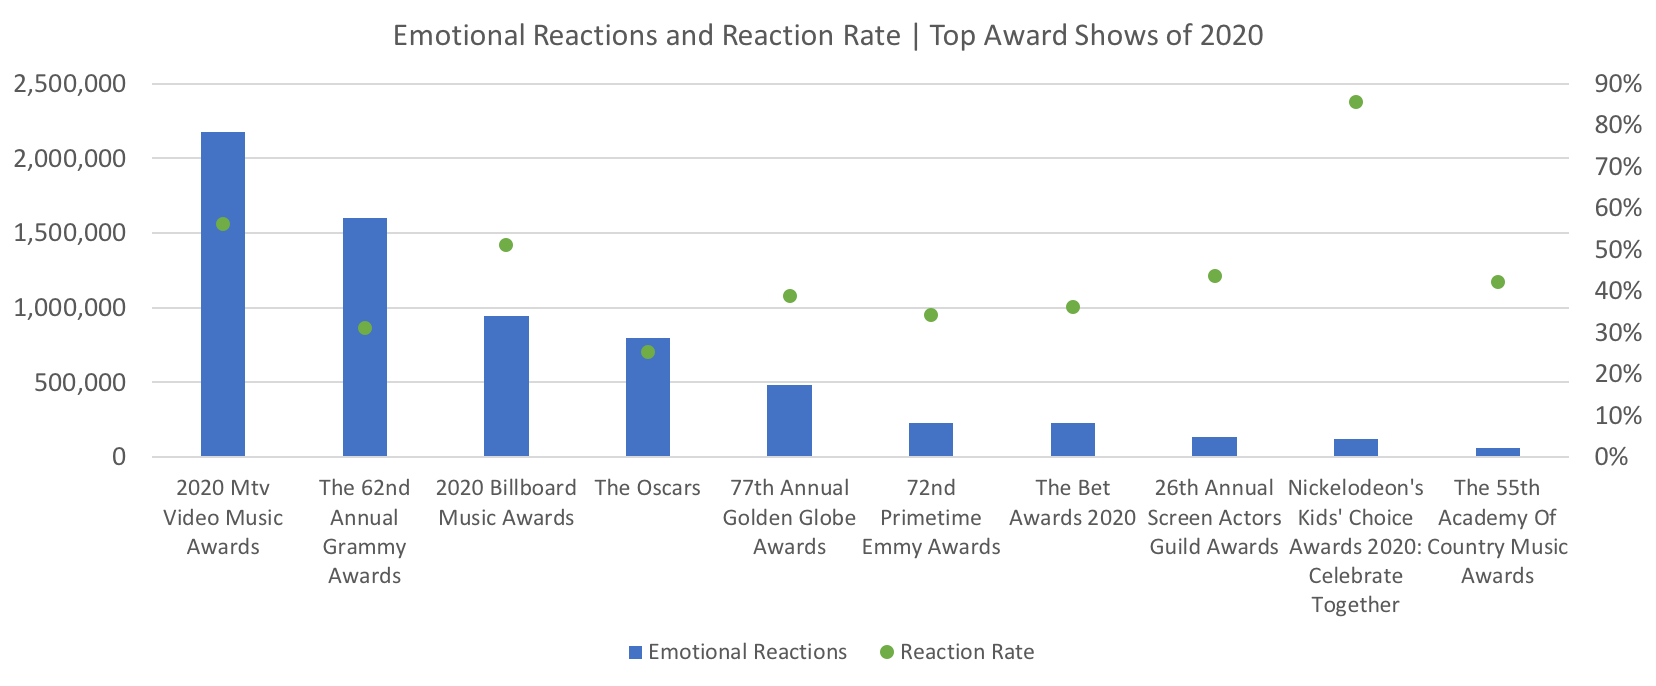 Source: Canvs Explore, Top Award Shows of 2020 ranked by Emotional Reaction in Airtime window + / - 3 Hours